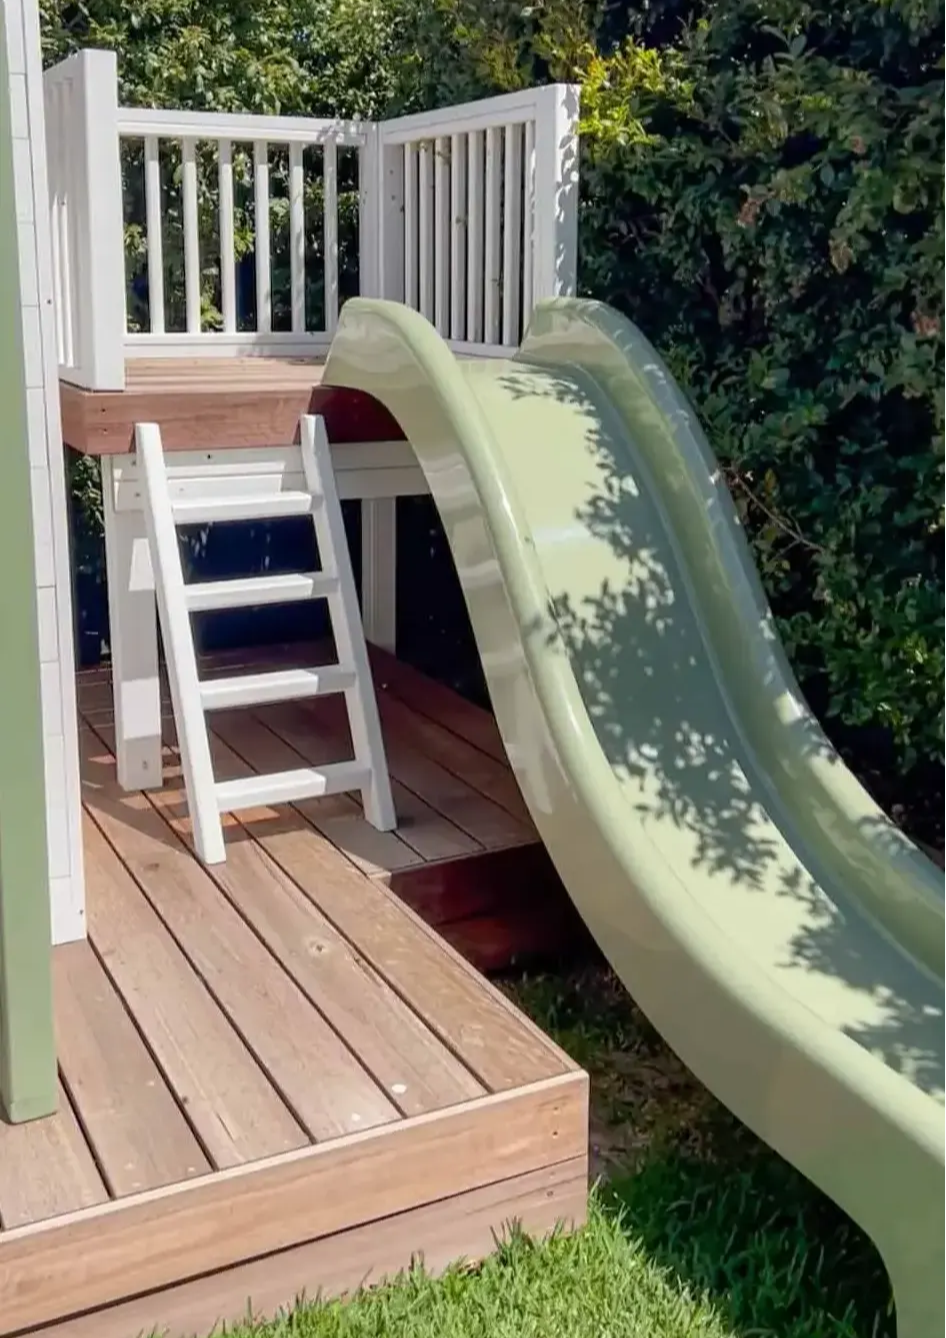 A slide with a ladder, Mini Zimi Cubby house